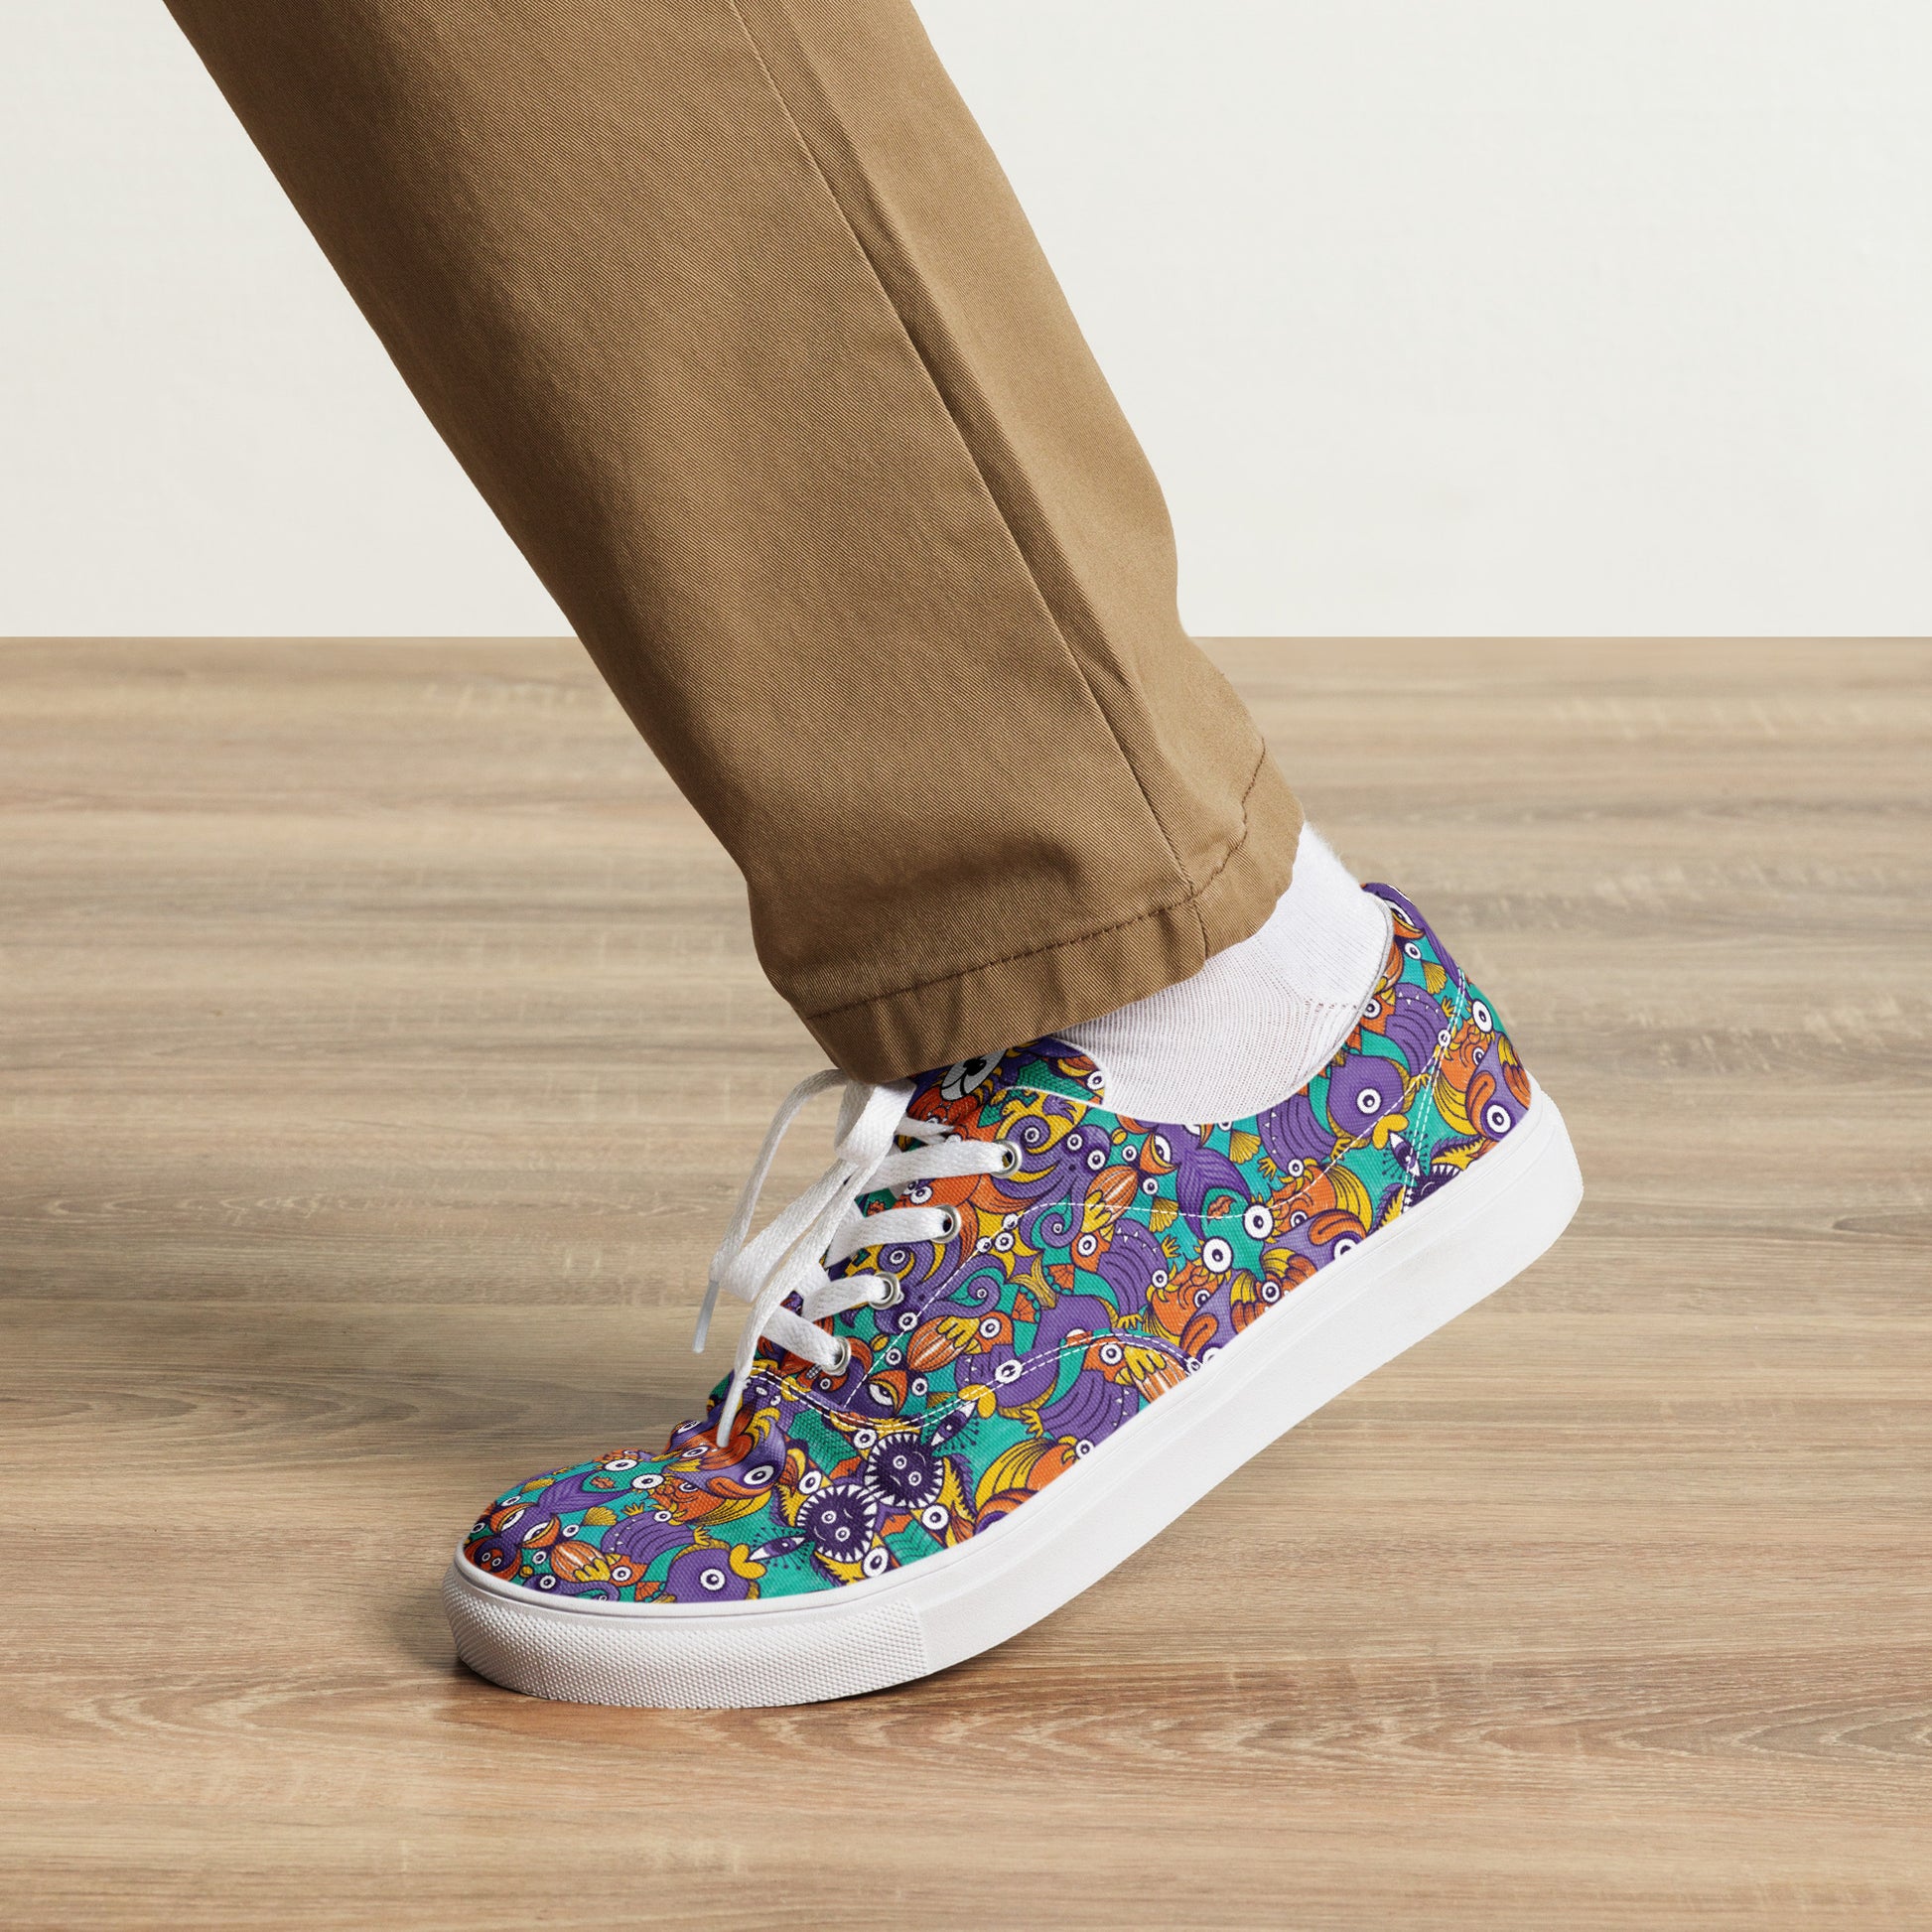 Dive into Whimsical Waters: An Undersea Odyssey - Men’s lace-up canvas shoes. Lifestyle